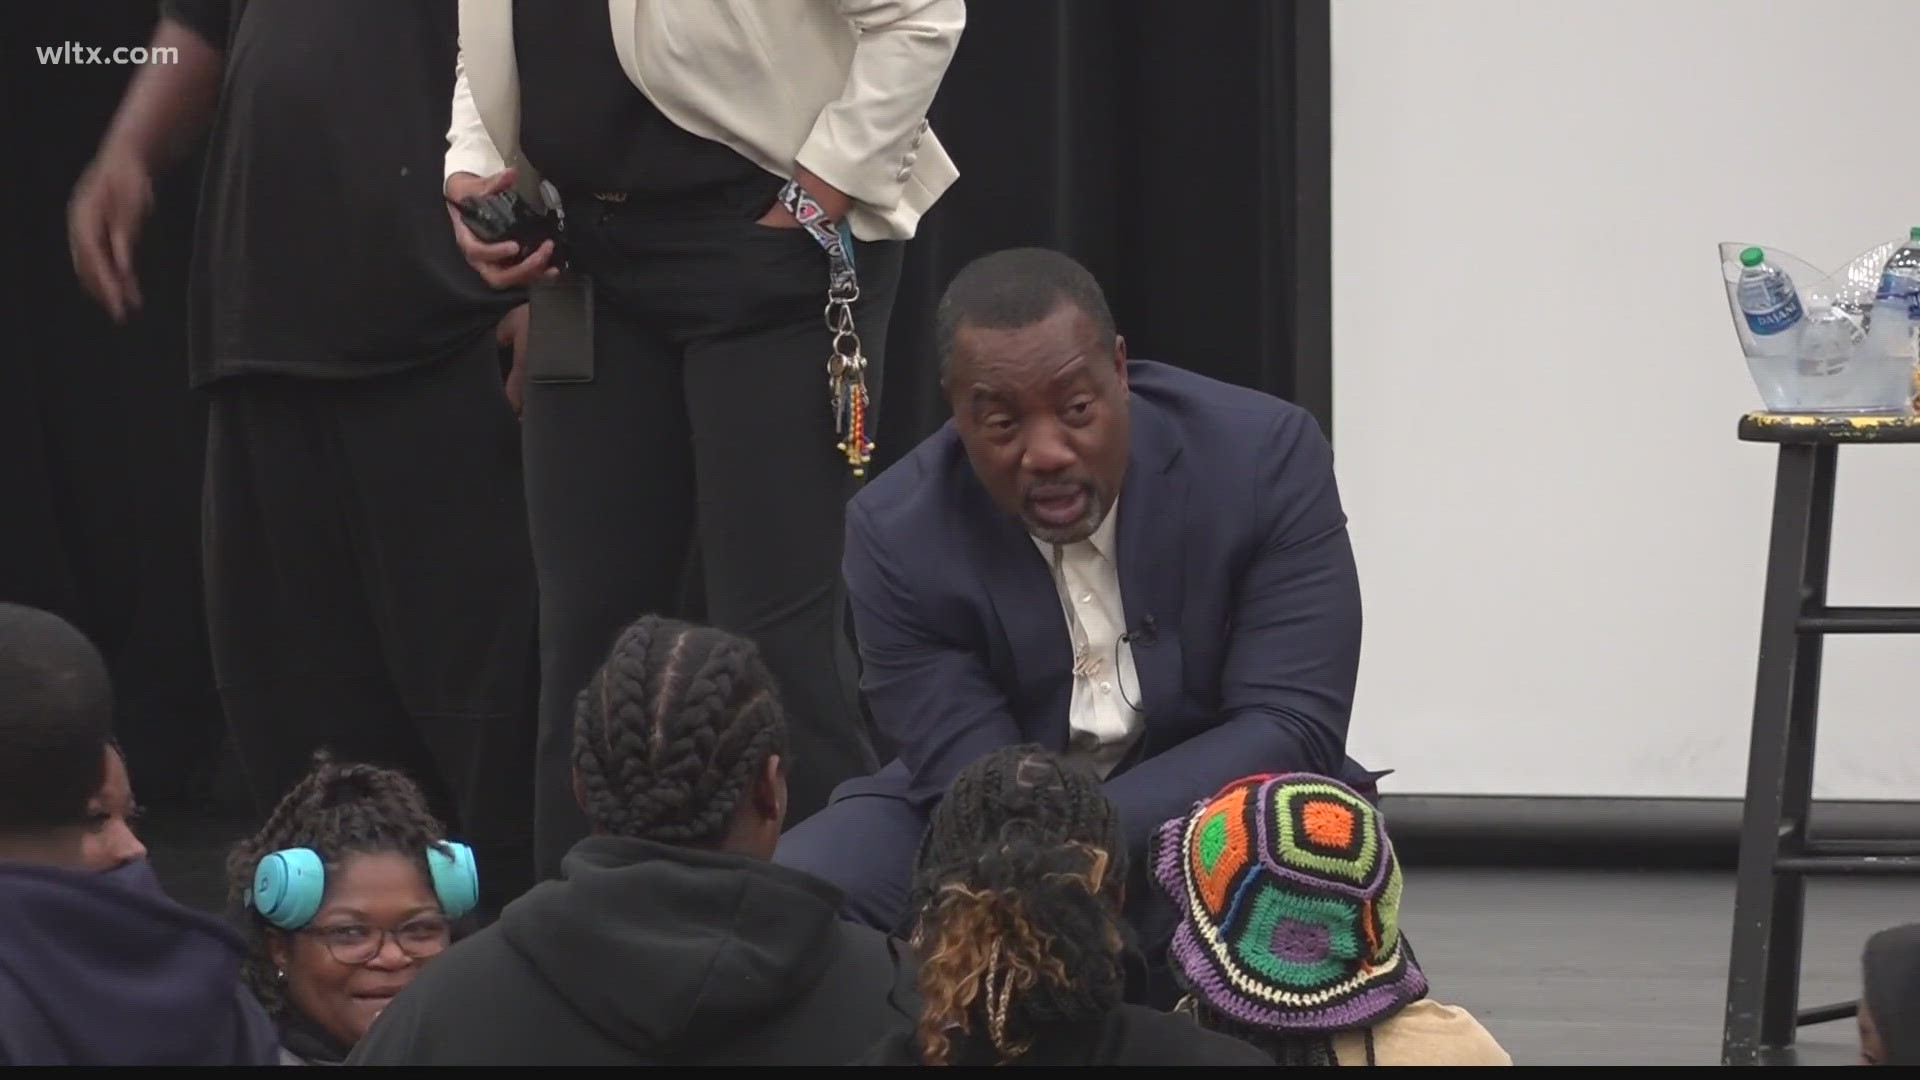 Actor Malik Yoba who was on the big screen in 'Cool Runnings' and 'Why did I get married?' visited and spoke to students at the high school.